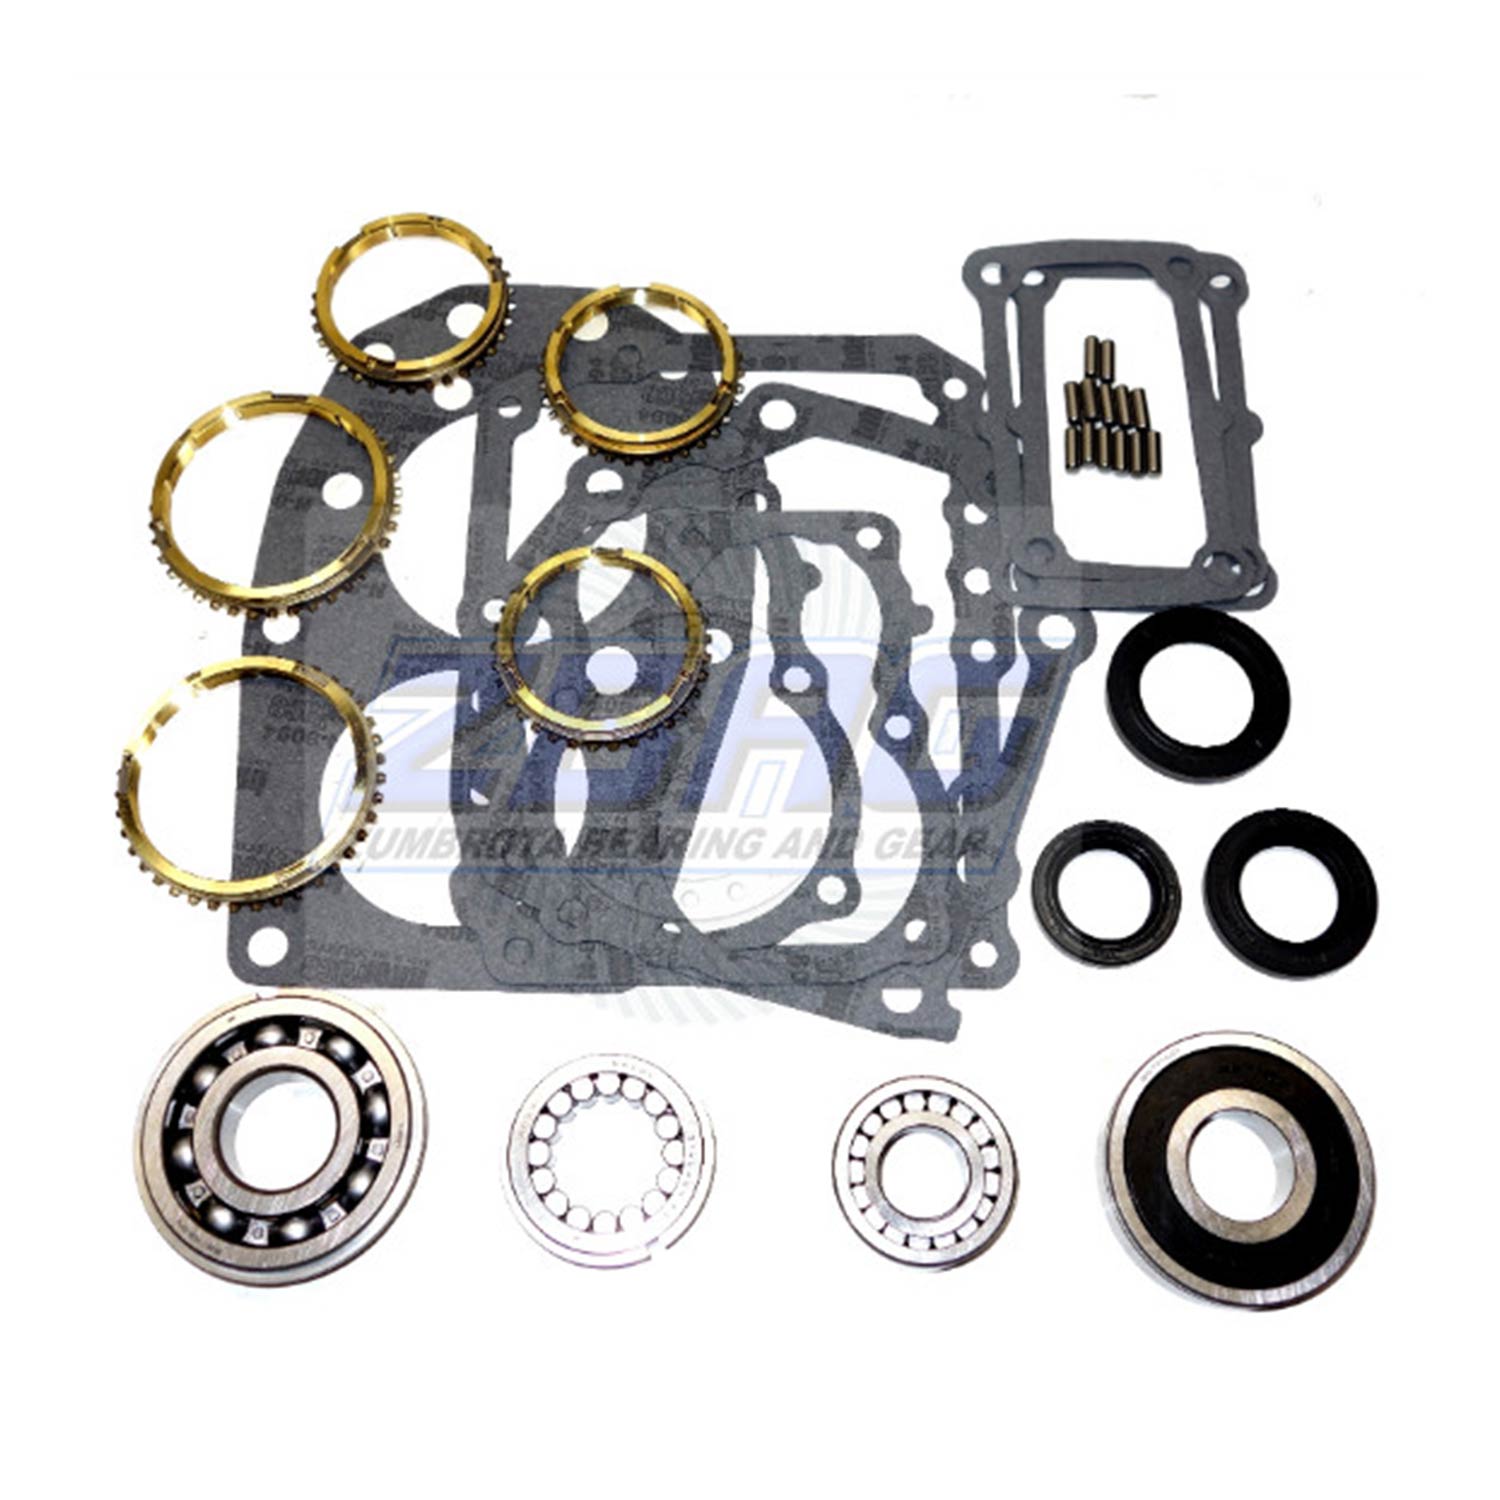 USA Standard 75379 Manual Transmission R151 Bearing Kit, 1987+ Toyota With Synchro'S